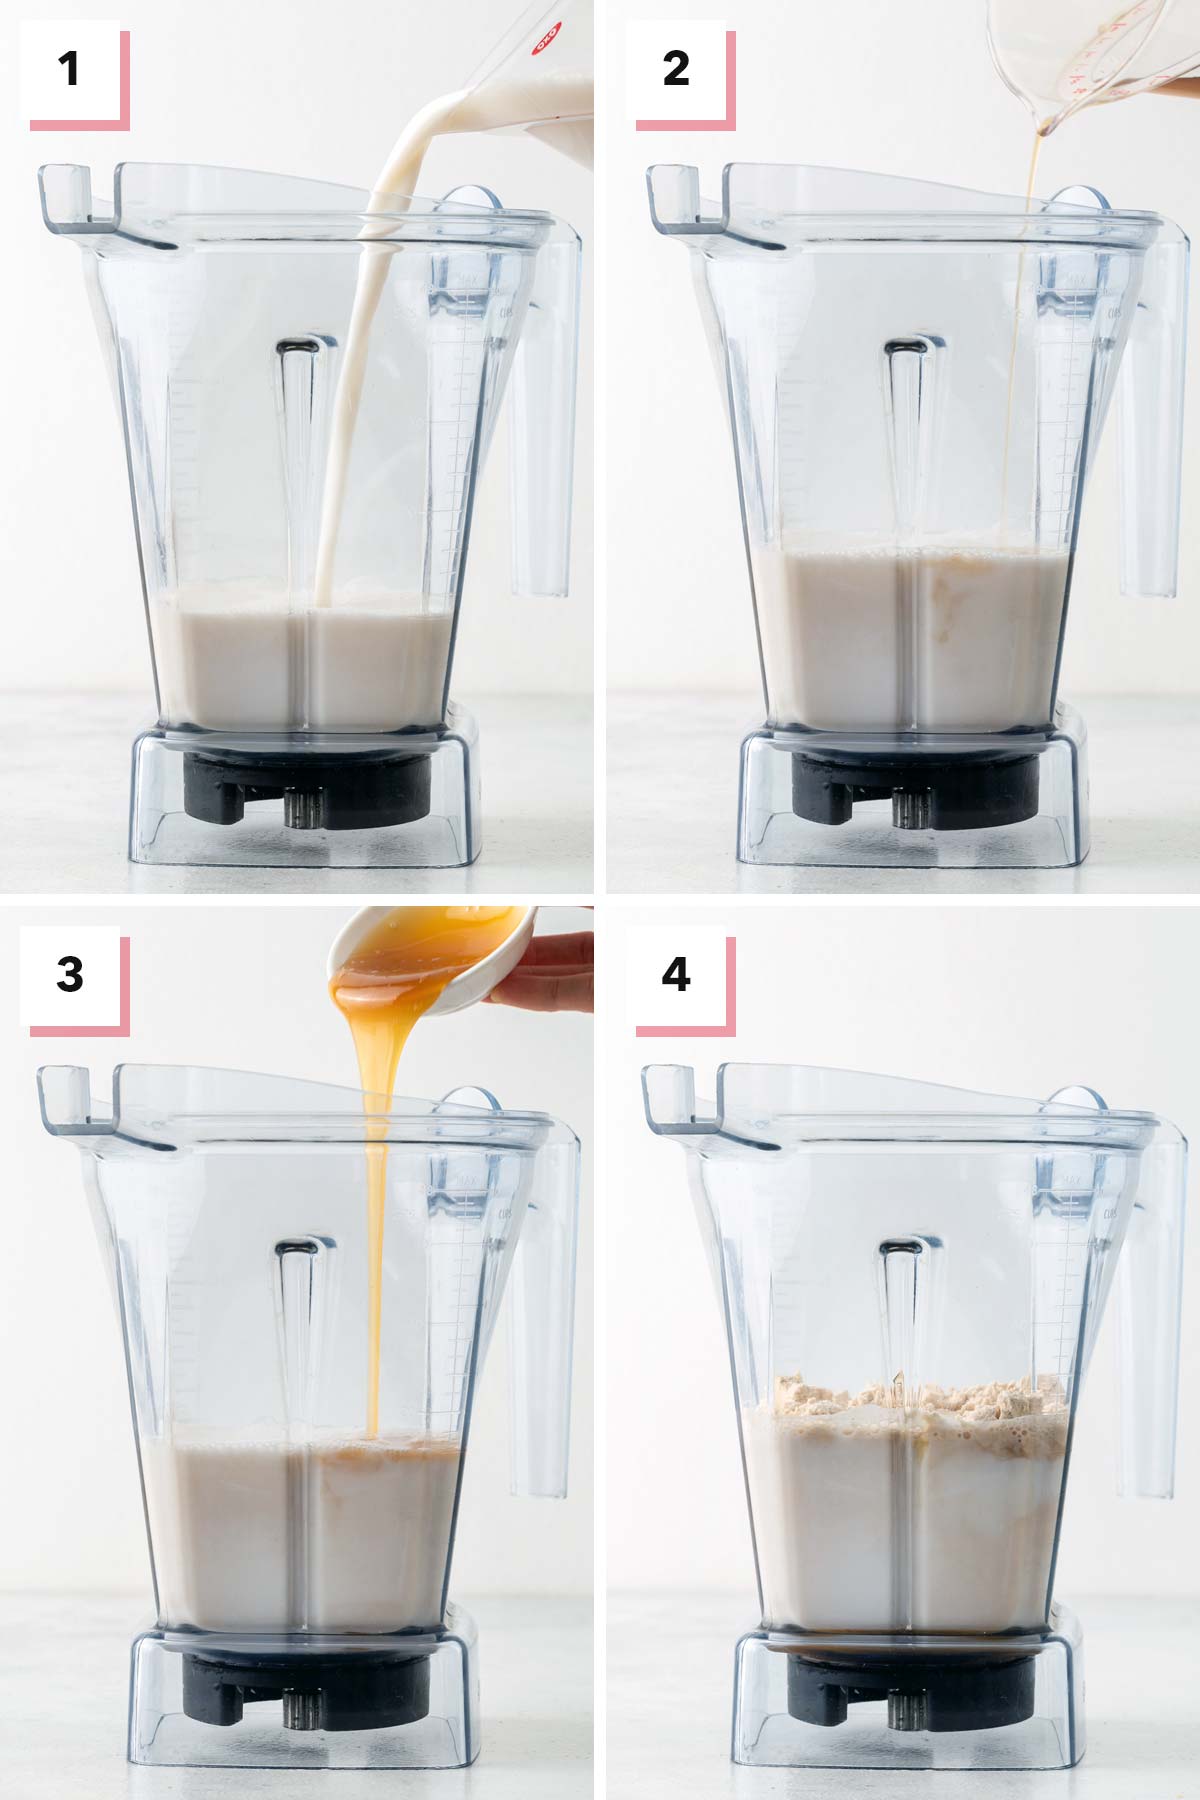 Steps for making a caramel protein shake.